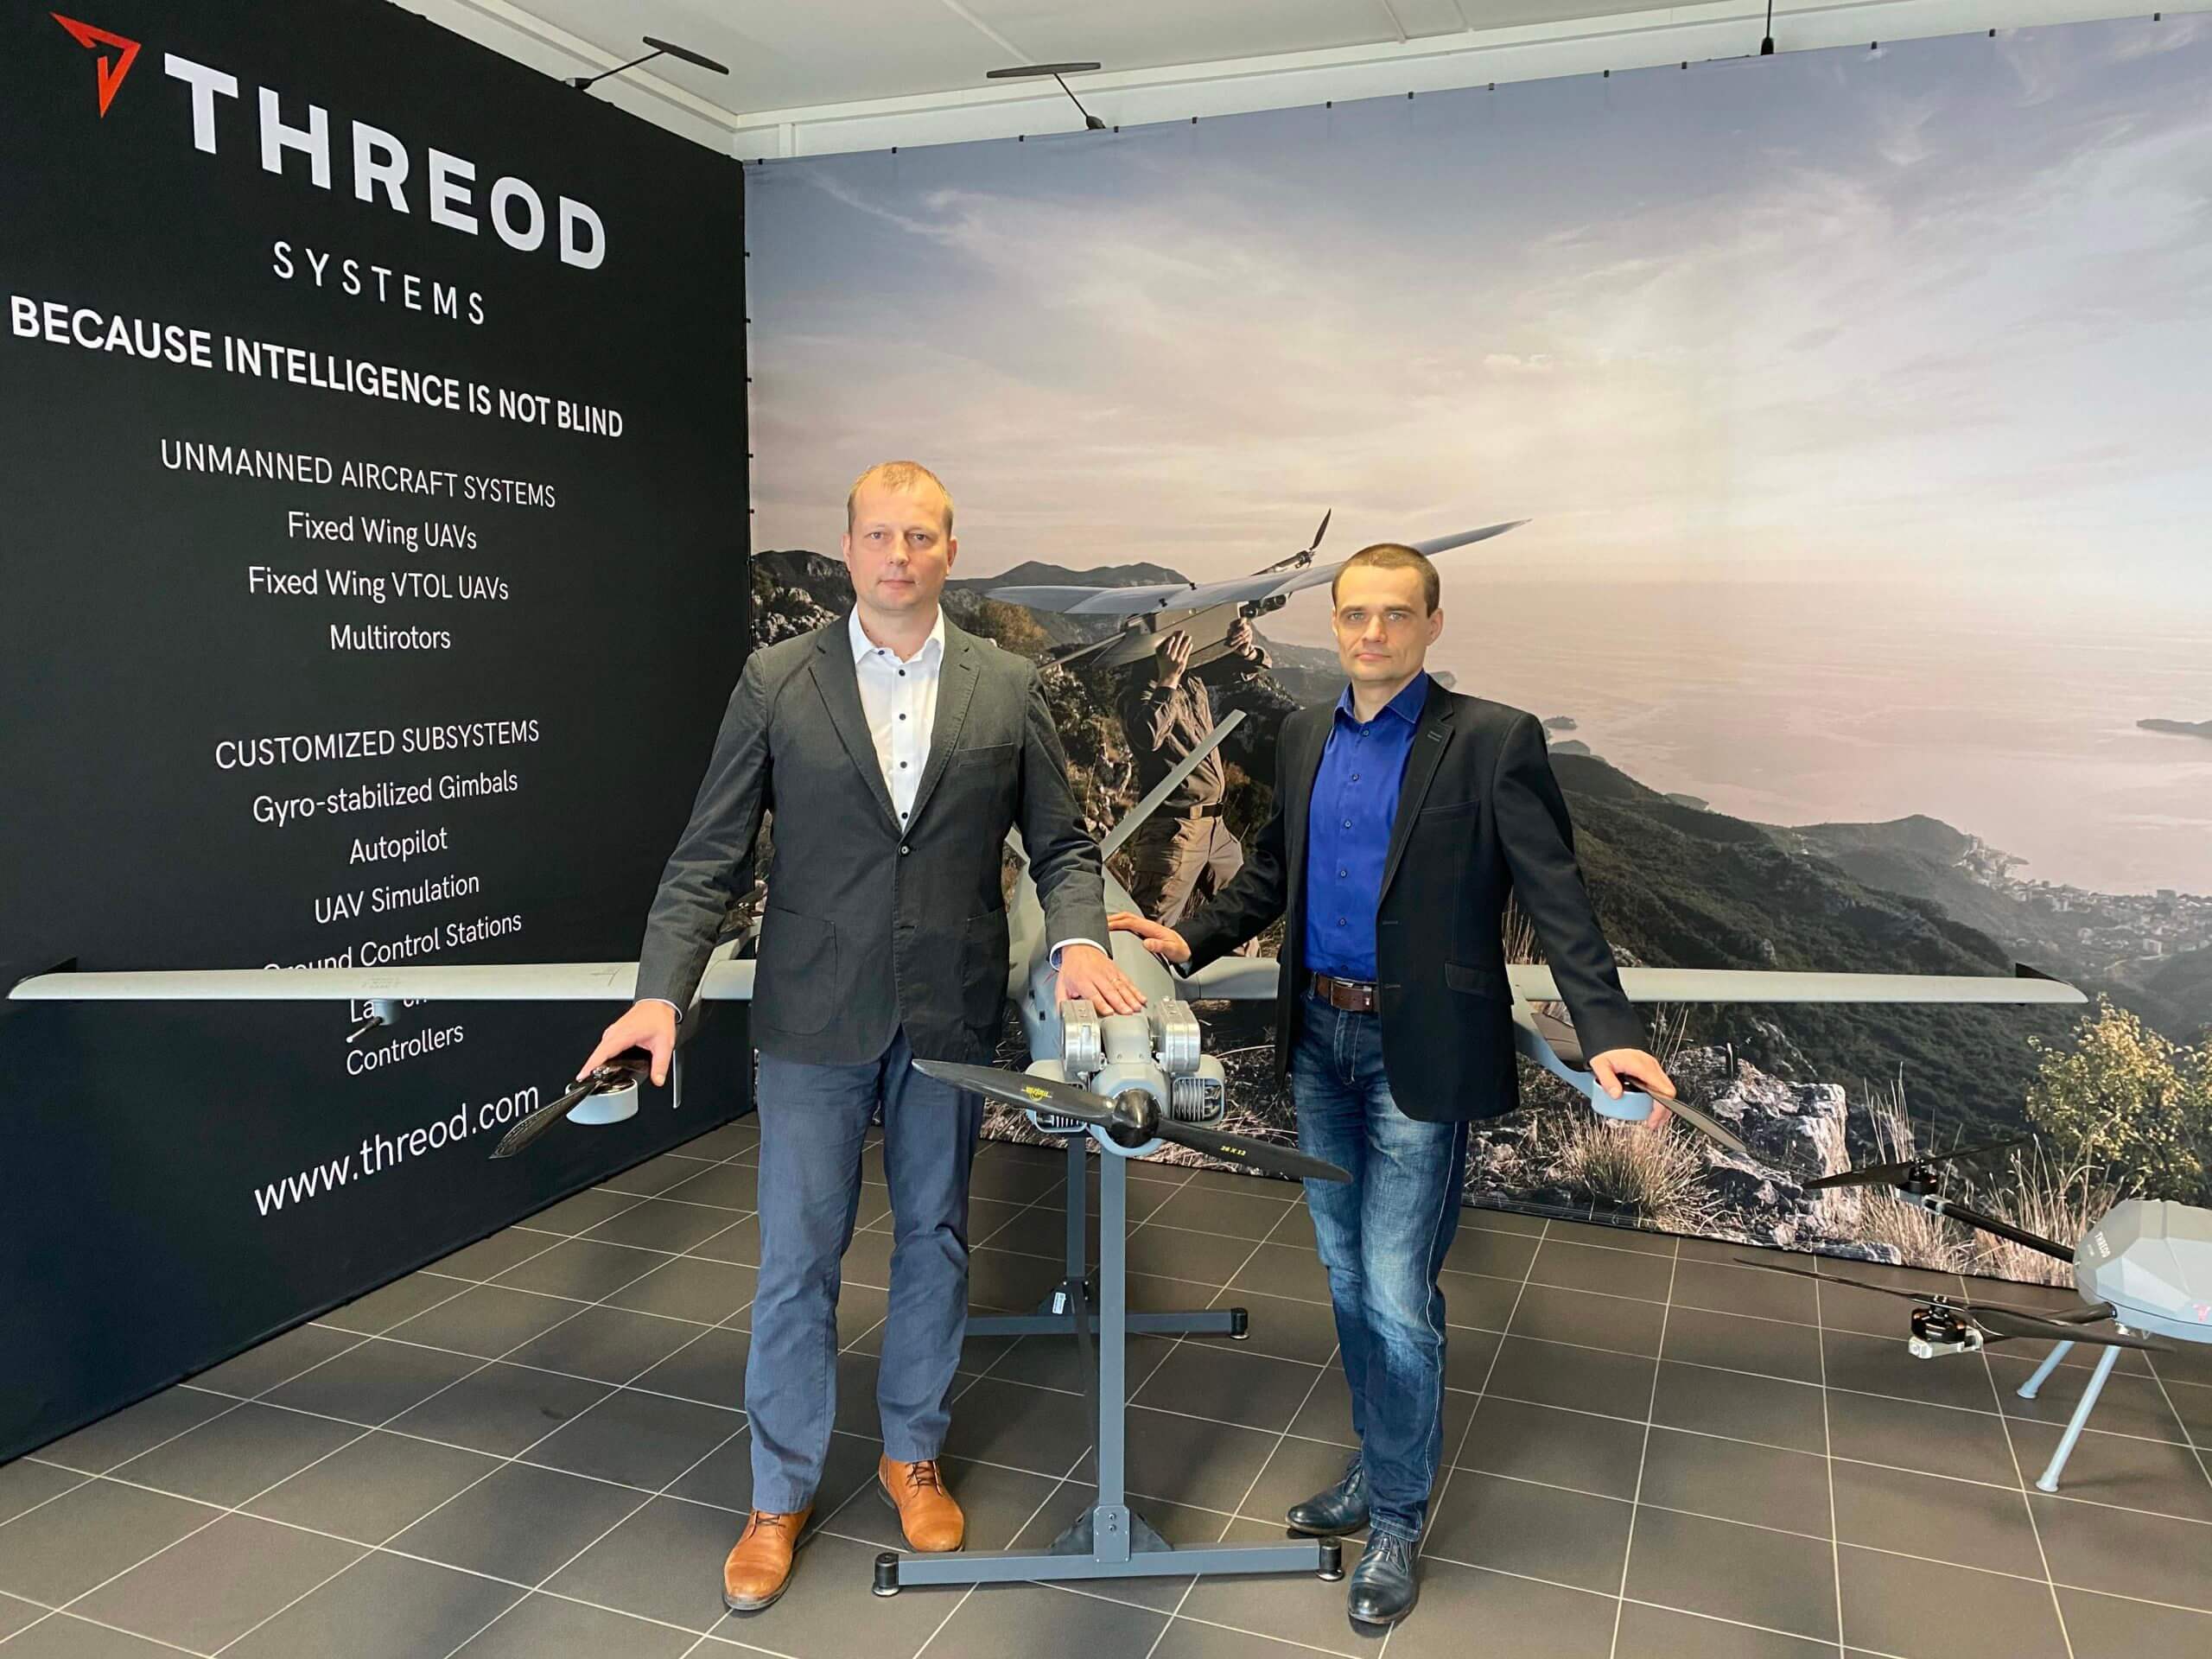 Villiko Nurmoja CEO of Threod Systems unmanned aircraft systems hands over the CEO role to Arno Vaik